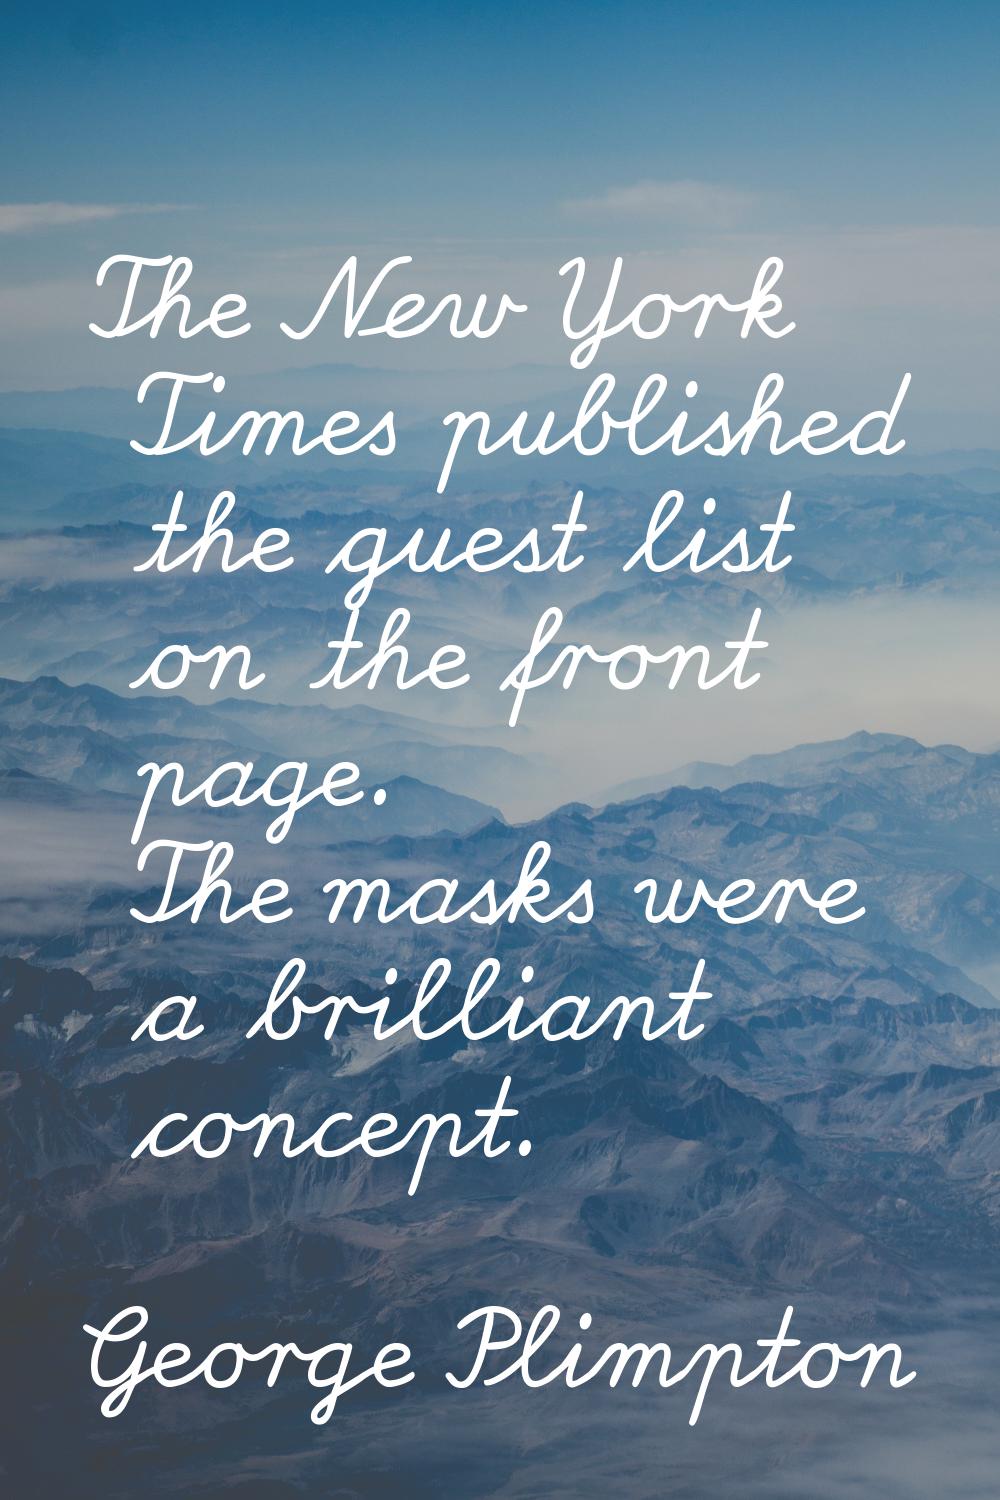 The New York Times published the guest list on the front page. The masks were a brilliant concept.